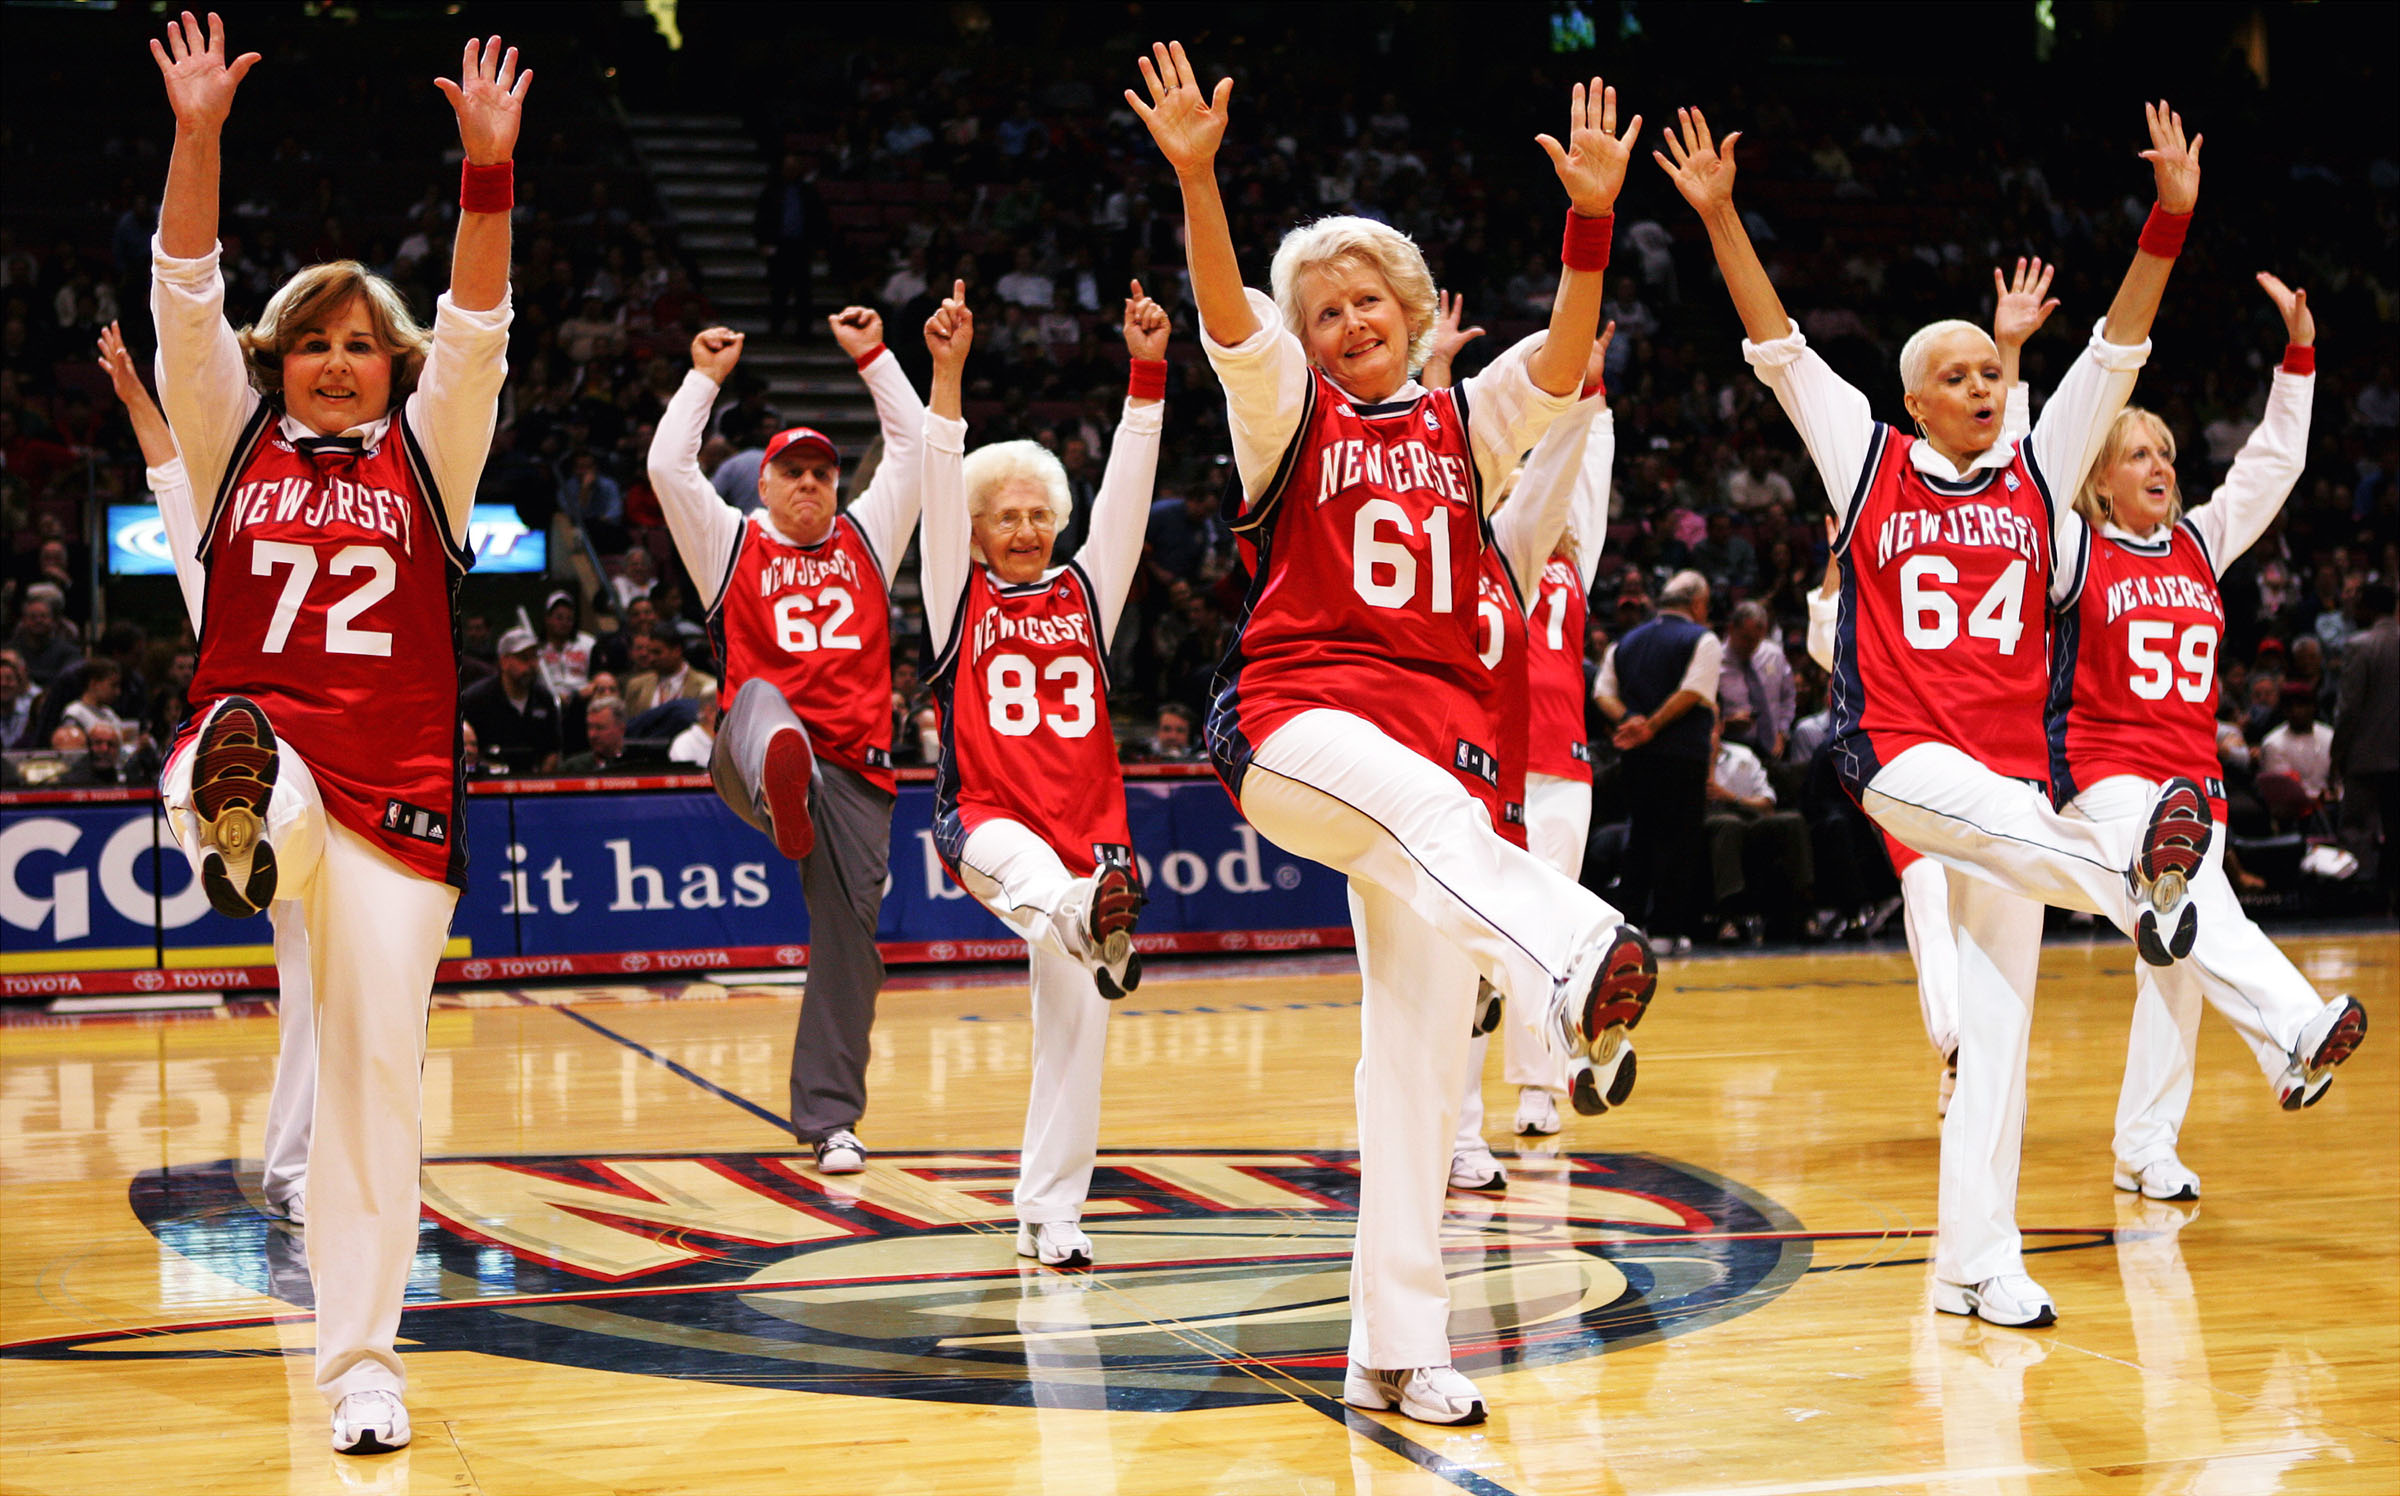 The New Jersey Nets Senior Dancers make their debut at the Continental Airlines Arena during a home game against the Detroit Pistons in 2007. (Linda Cataffo—NY Daily News Archive via Getty Images)